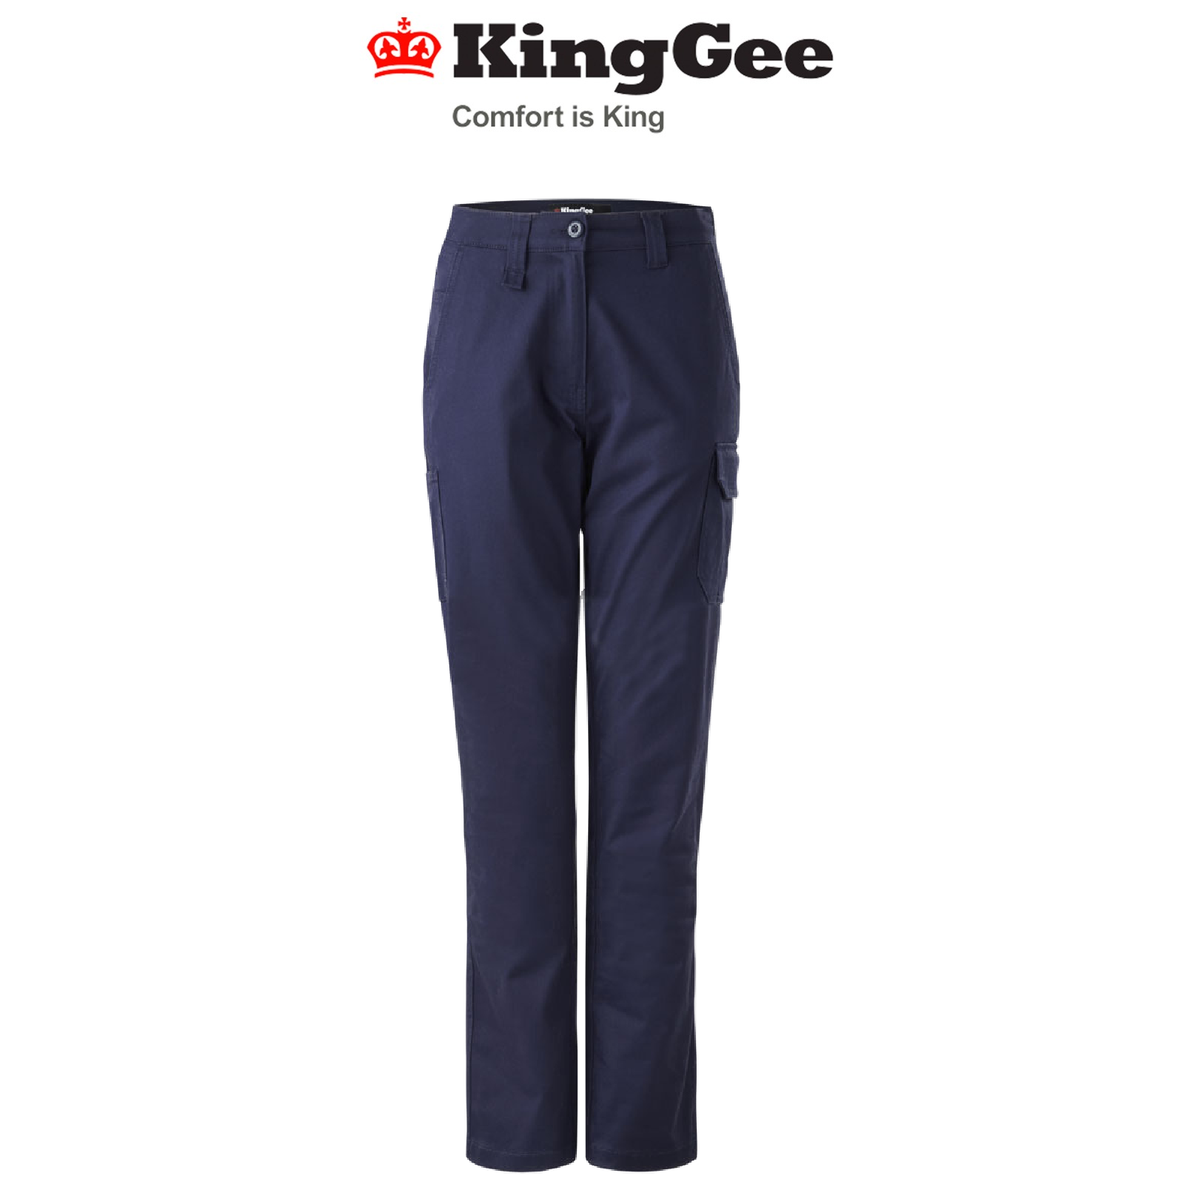 KingGee Women Stretch Cargo Pants Pant Comfort Work Safety Breathable K43011